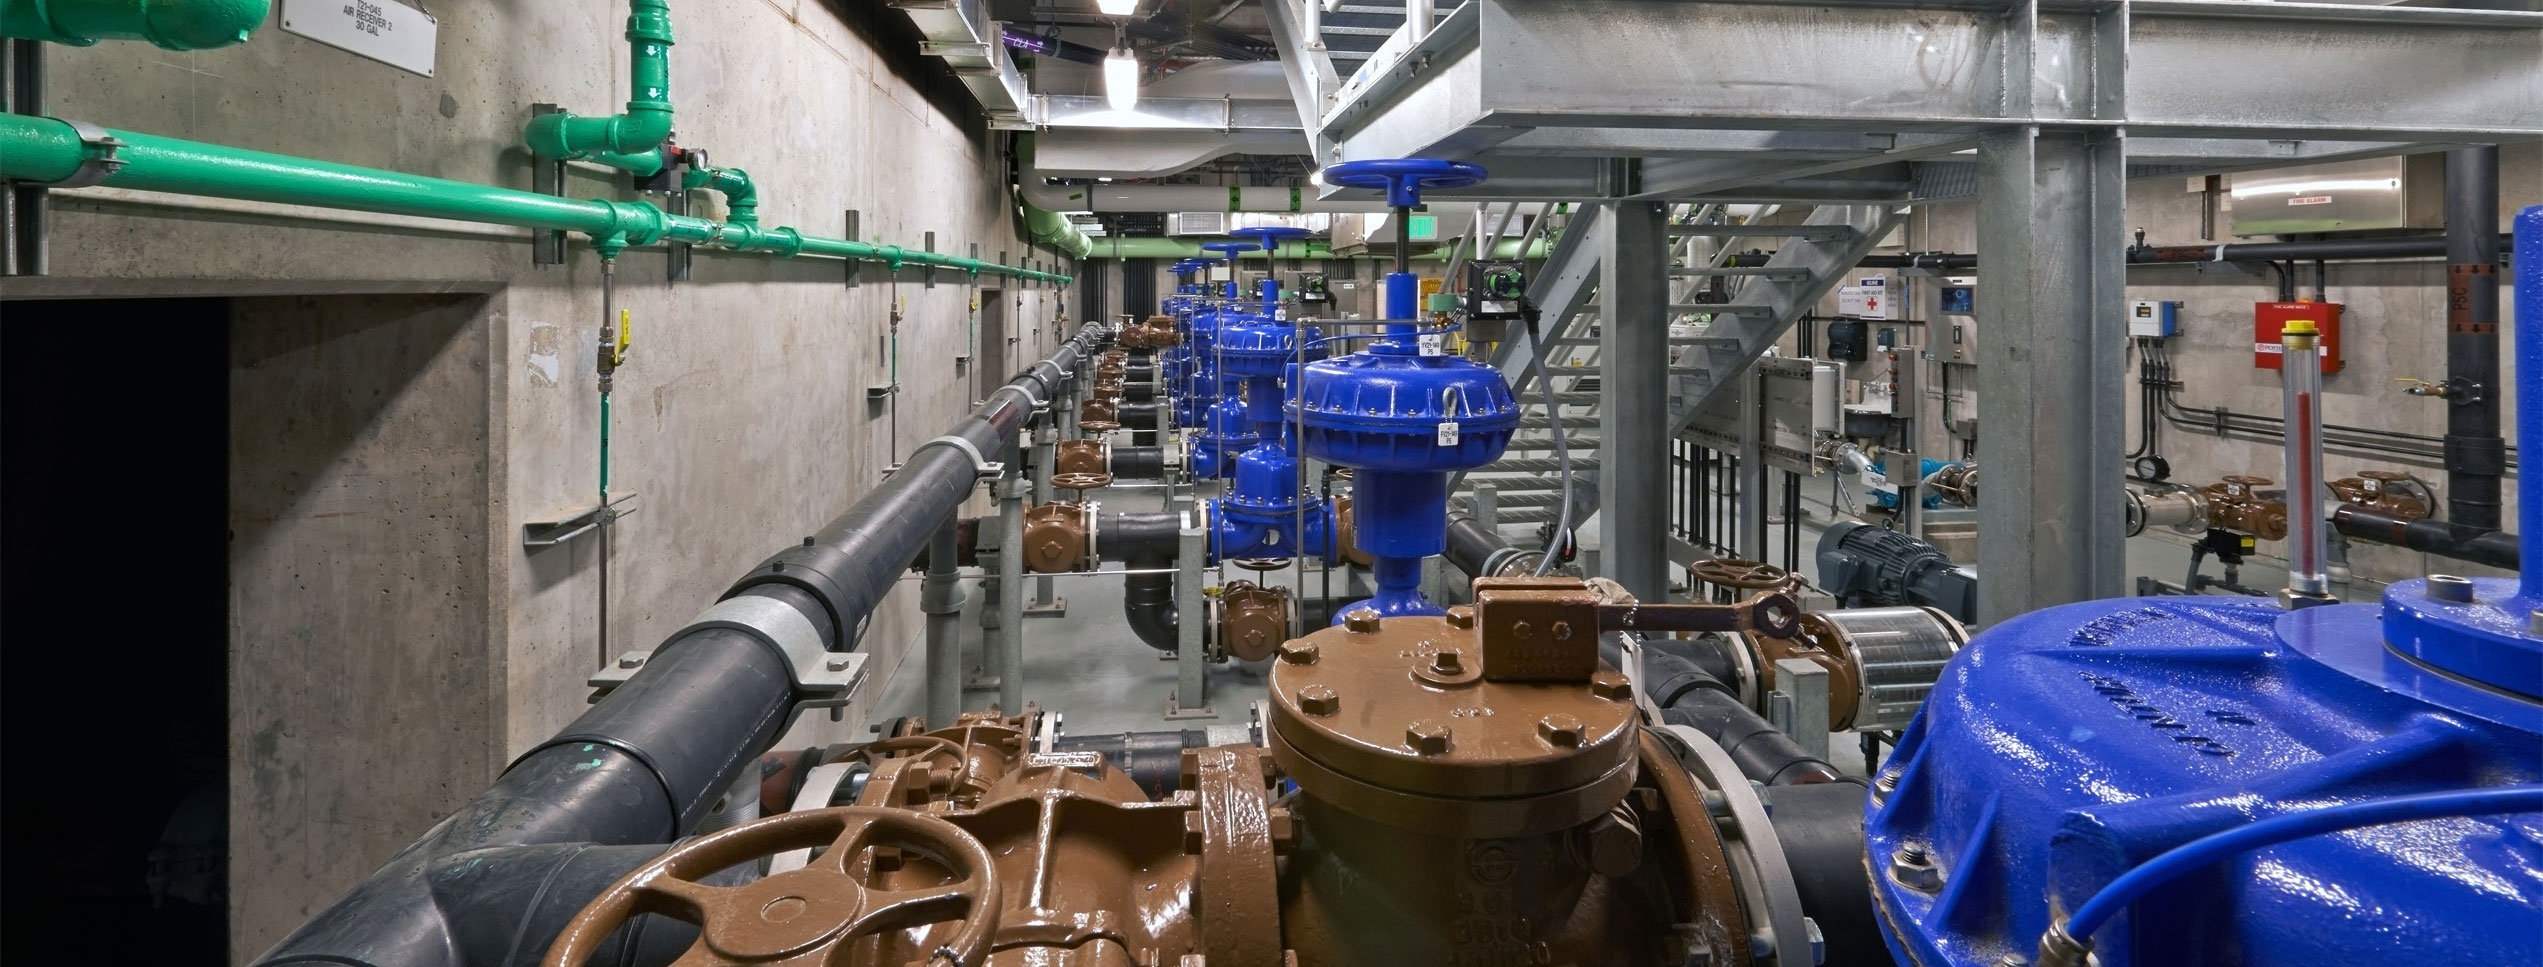 Treatment plant plumbing in new water treatment facility